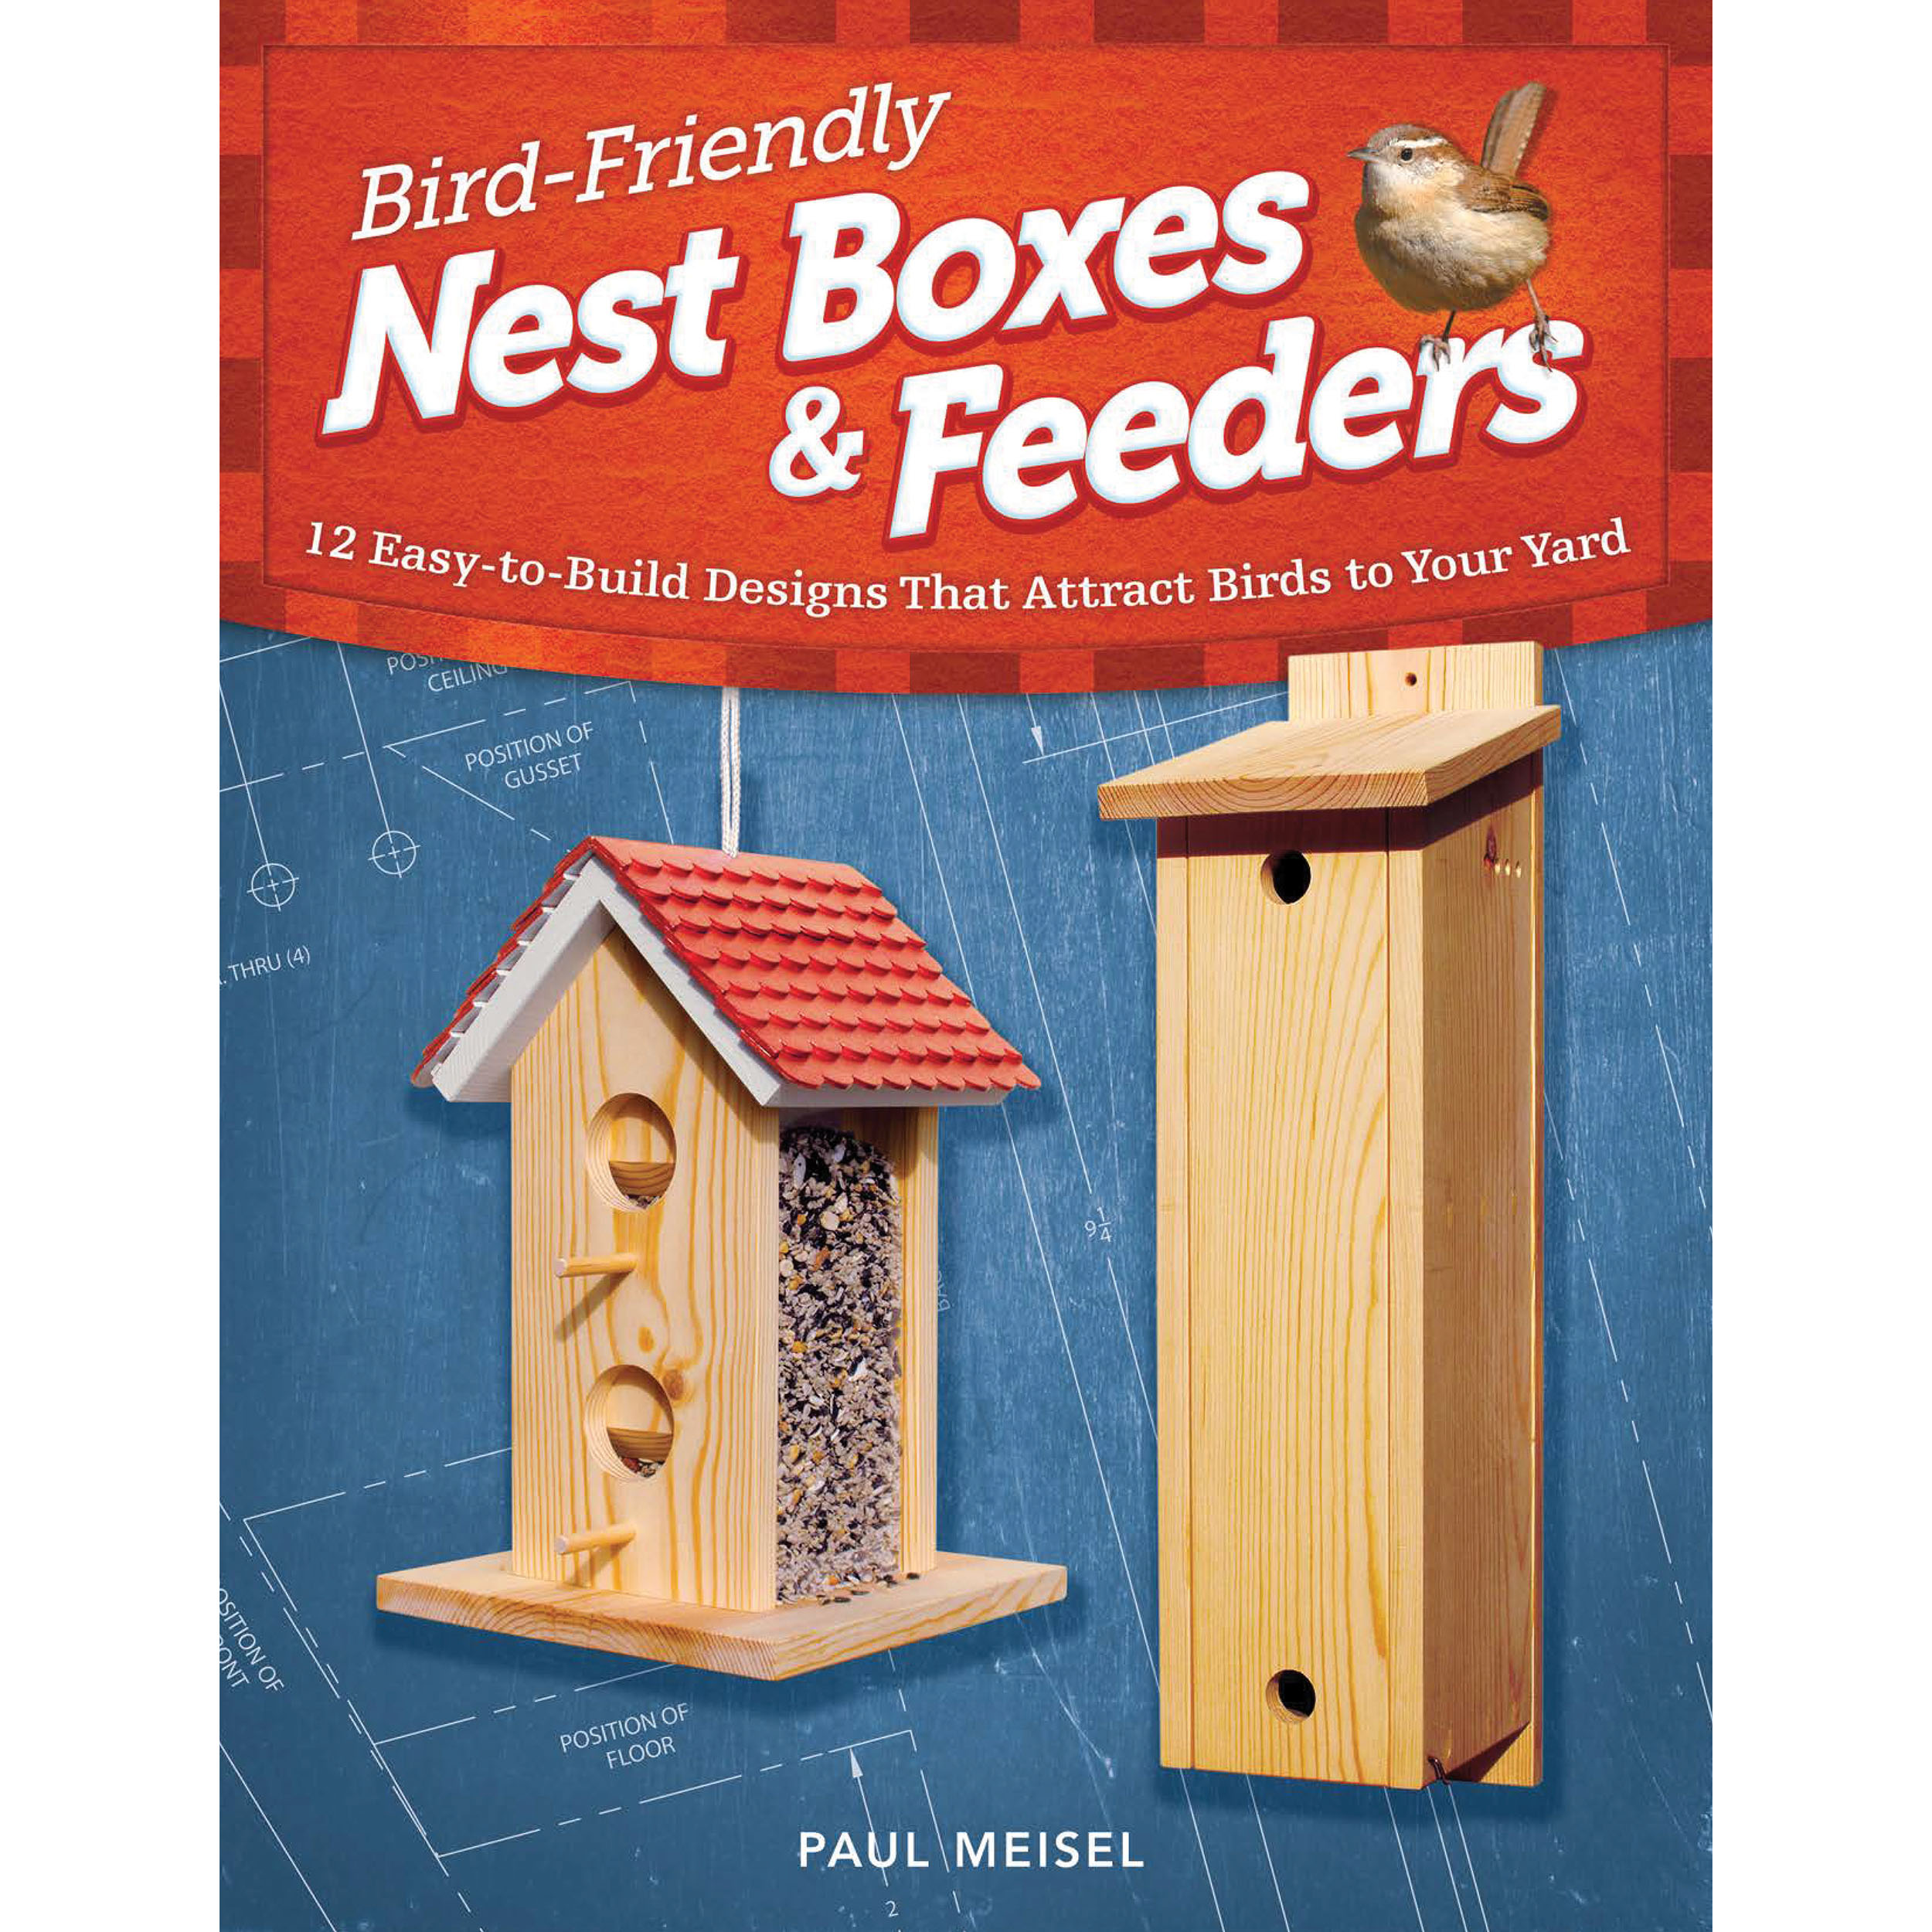 Bird-friendly Nest Boxes And Feeders